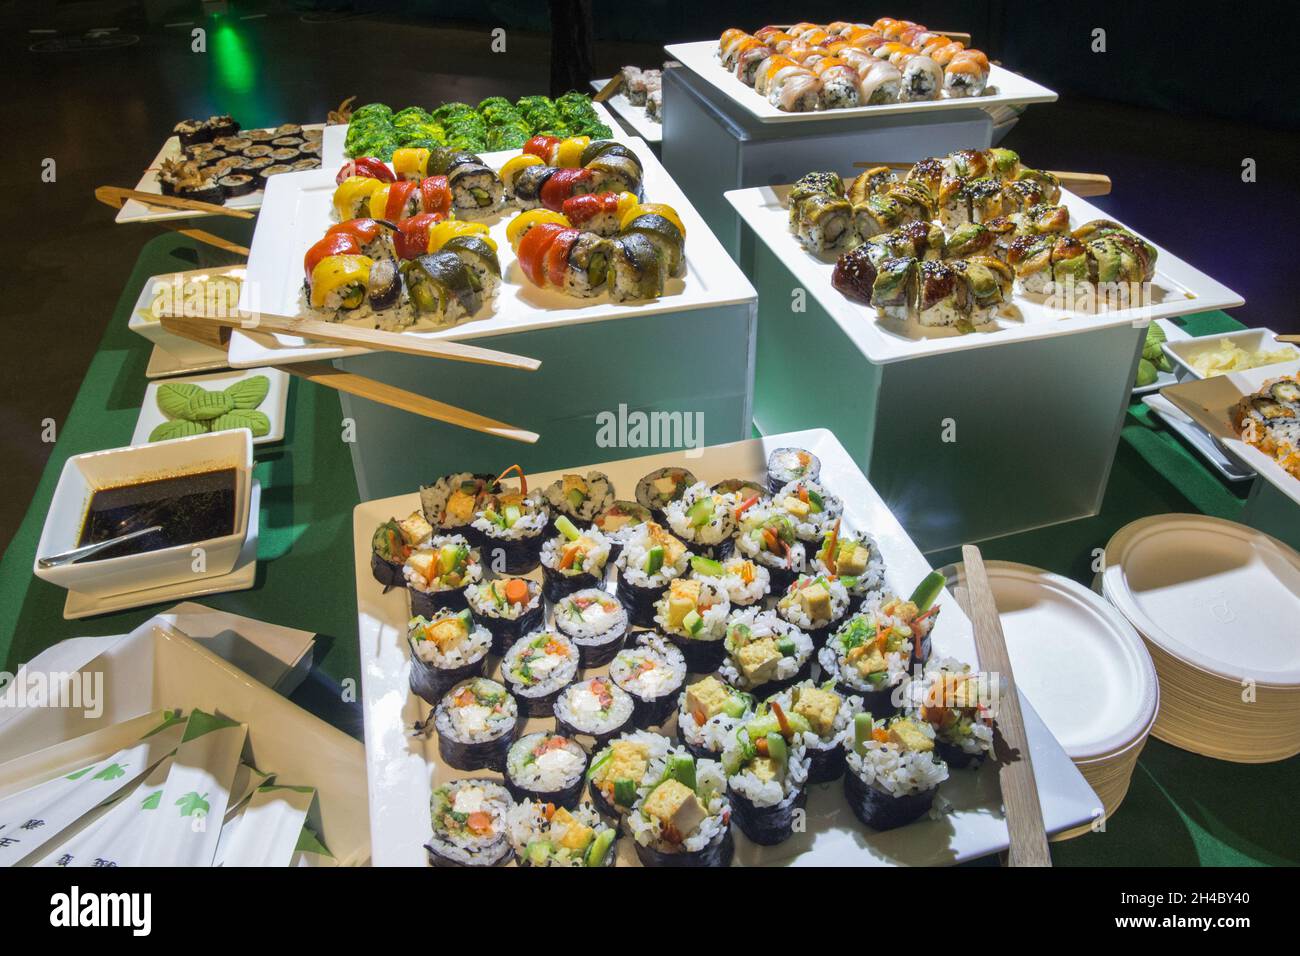 Assorted sushi at a dinner buffet at an event. Stock Photo